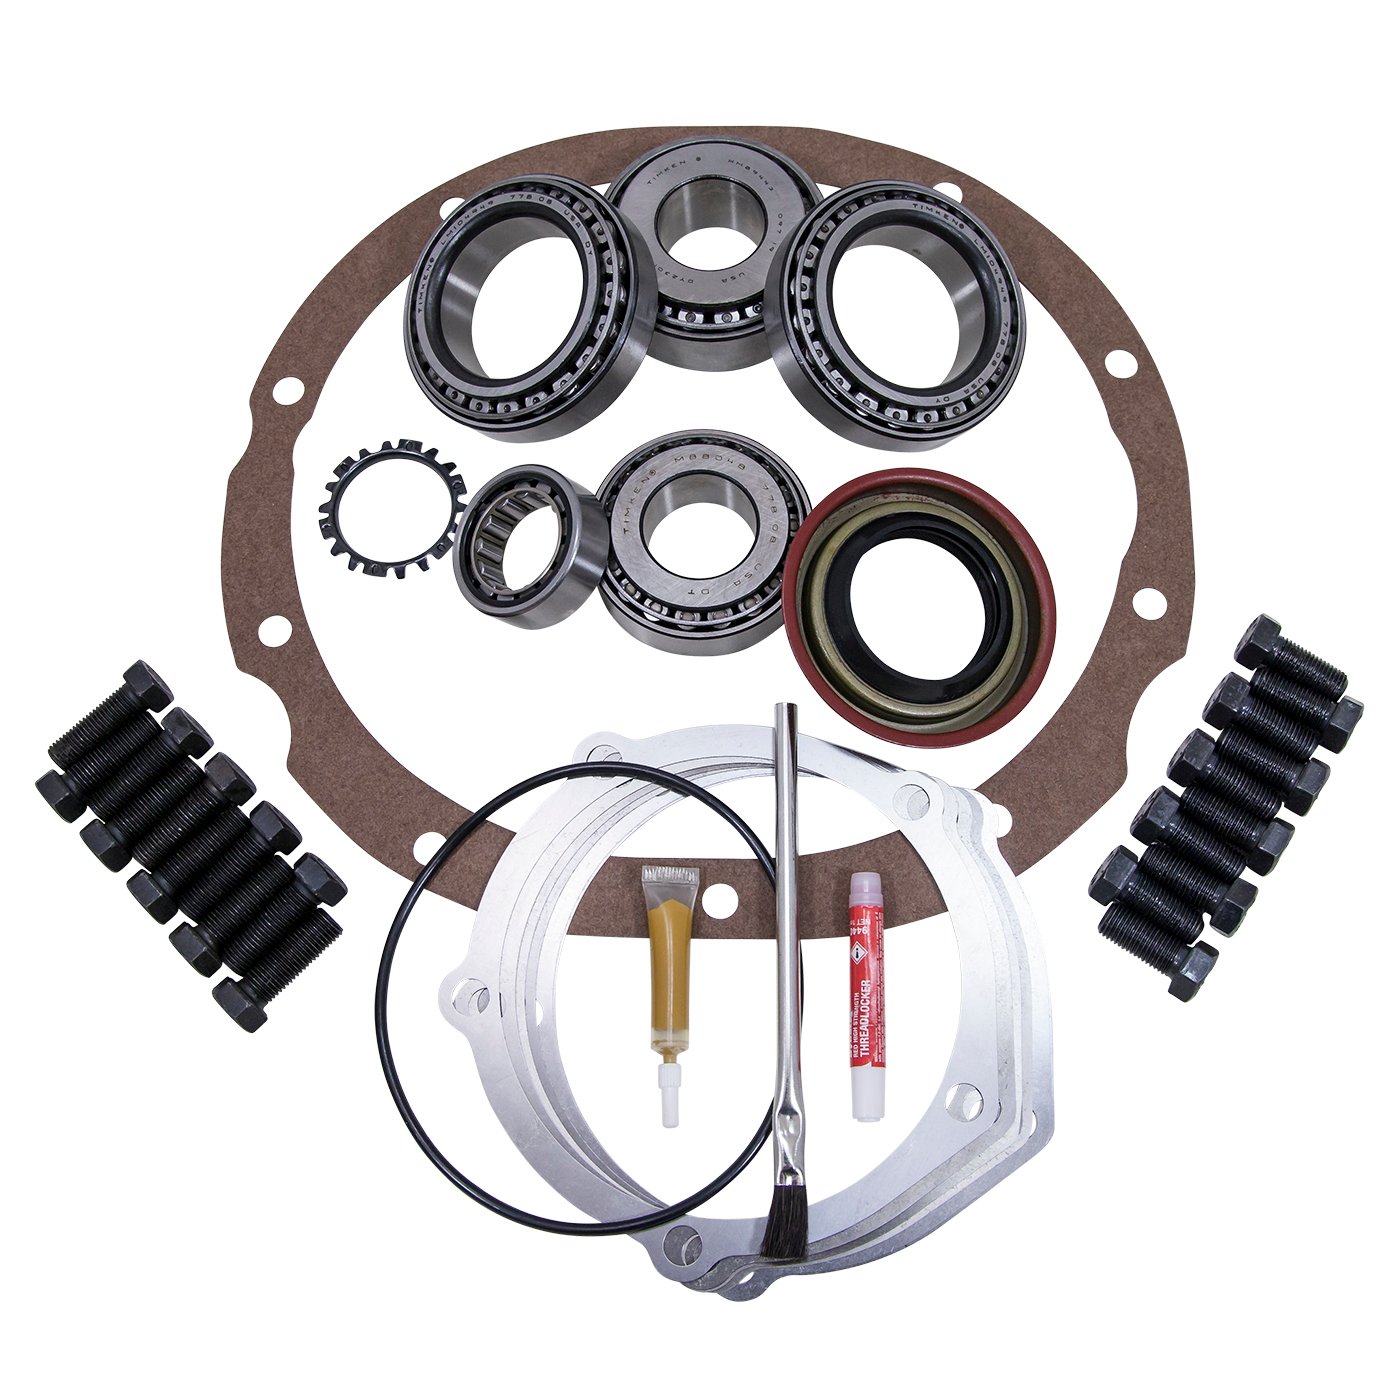 USA Standard 37039 Master Overhaul Kit, For d 9 in. Lm603011 Diff W/Daytona Pinion Support